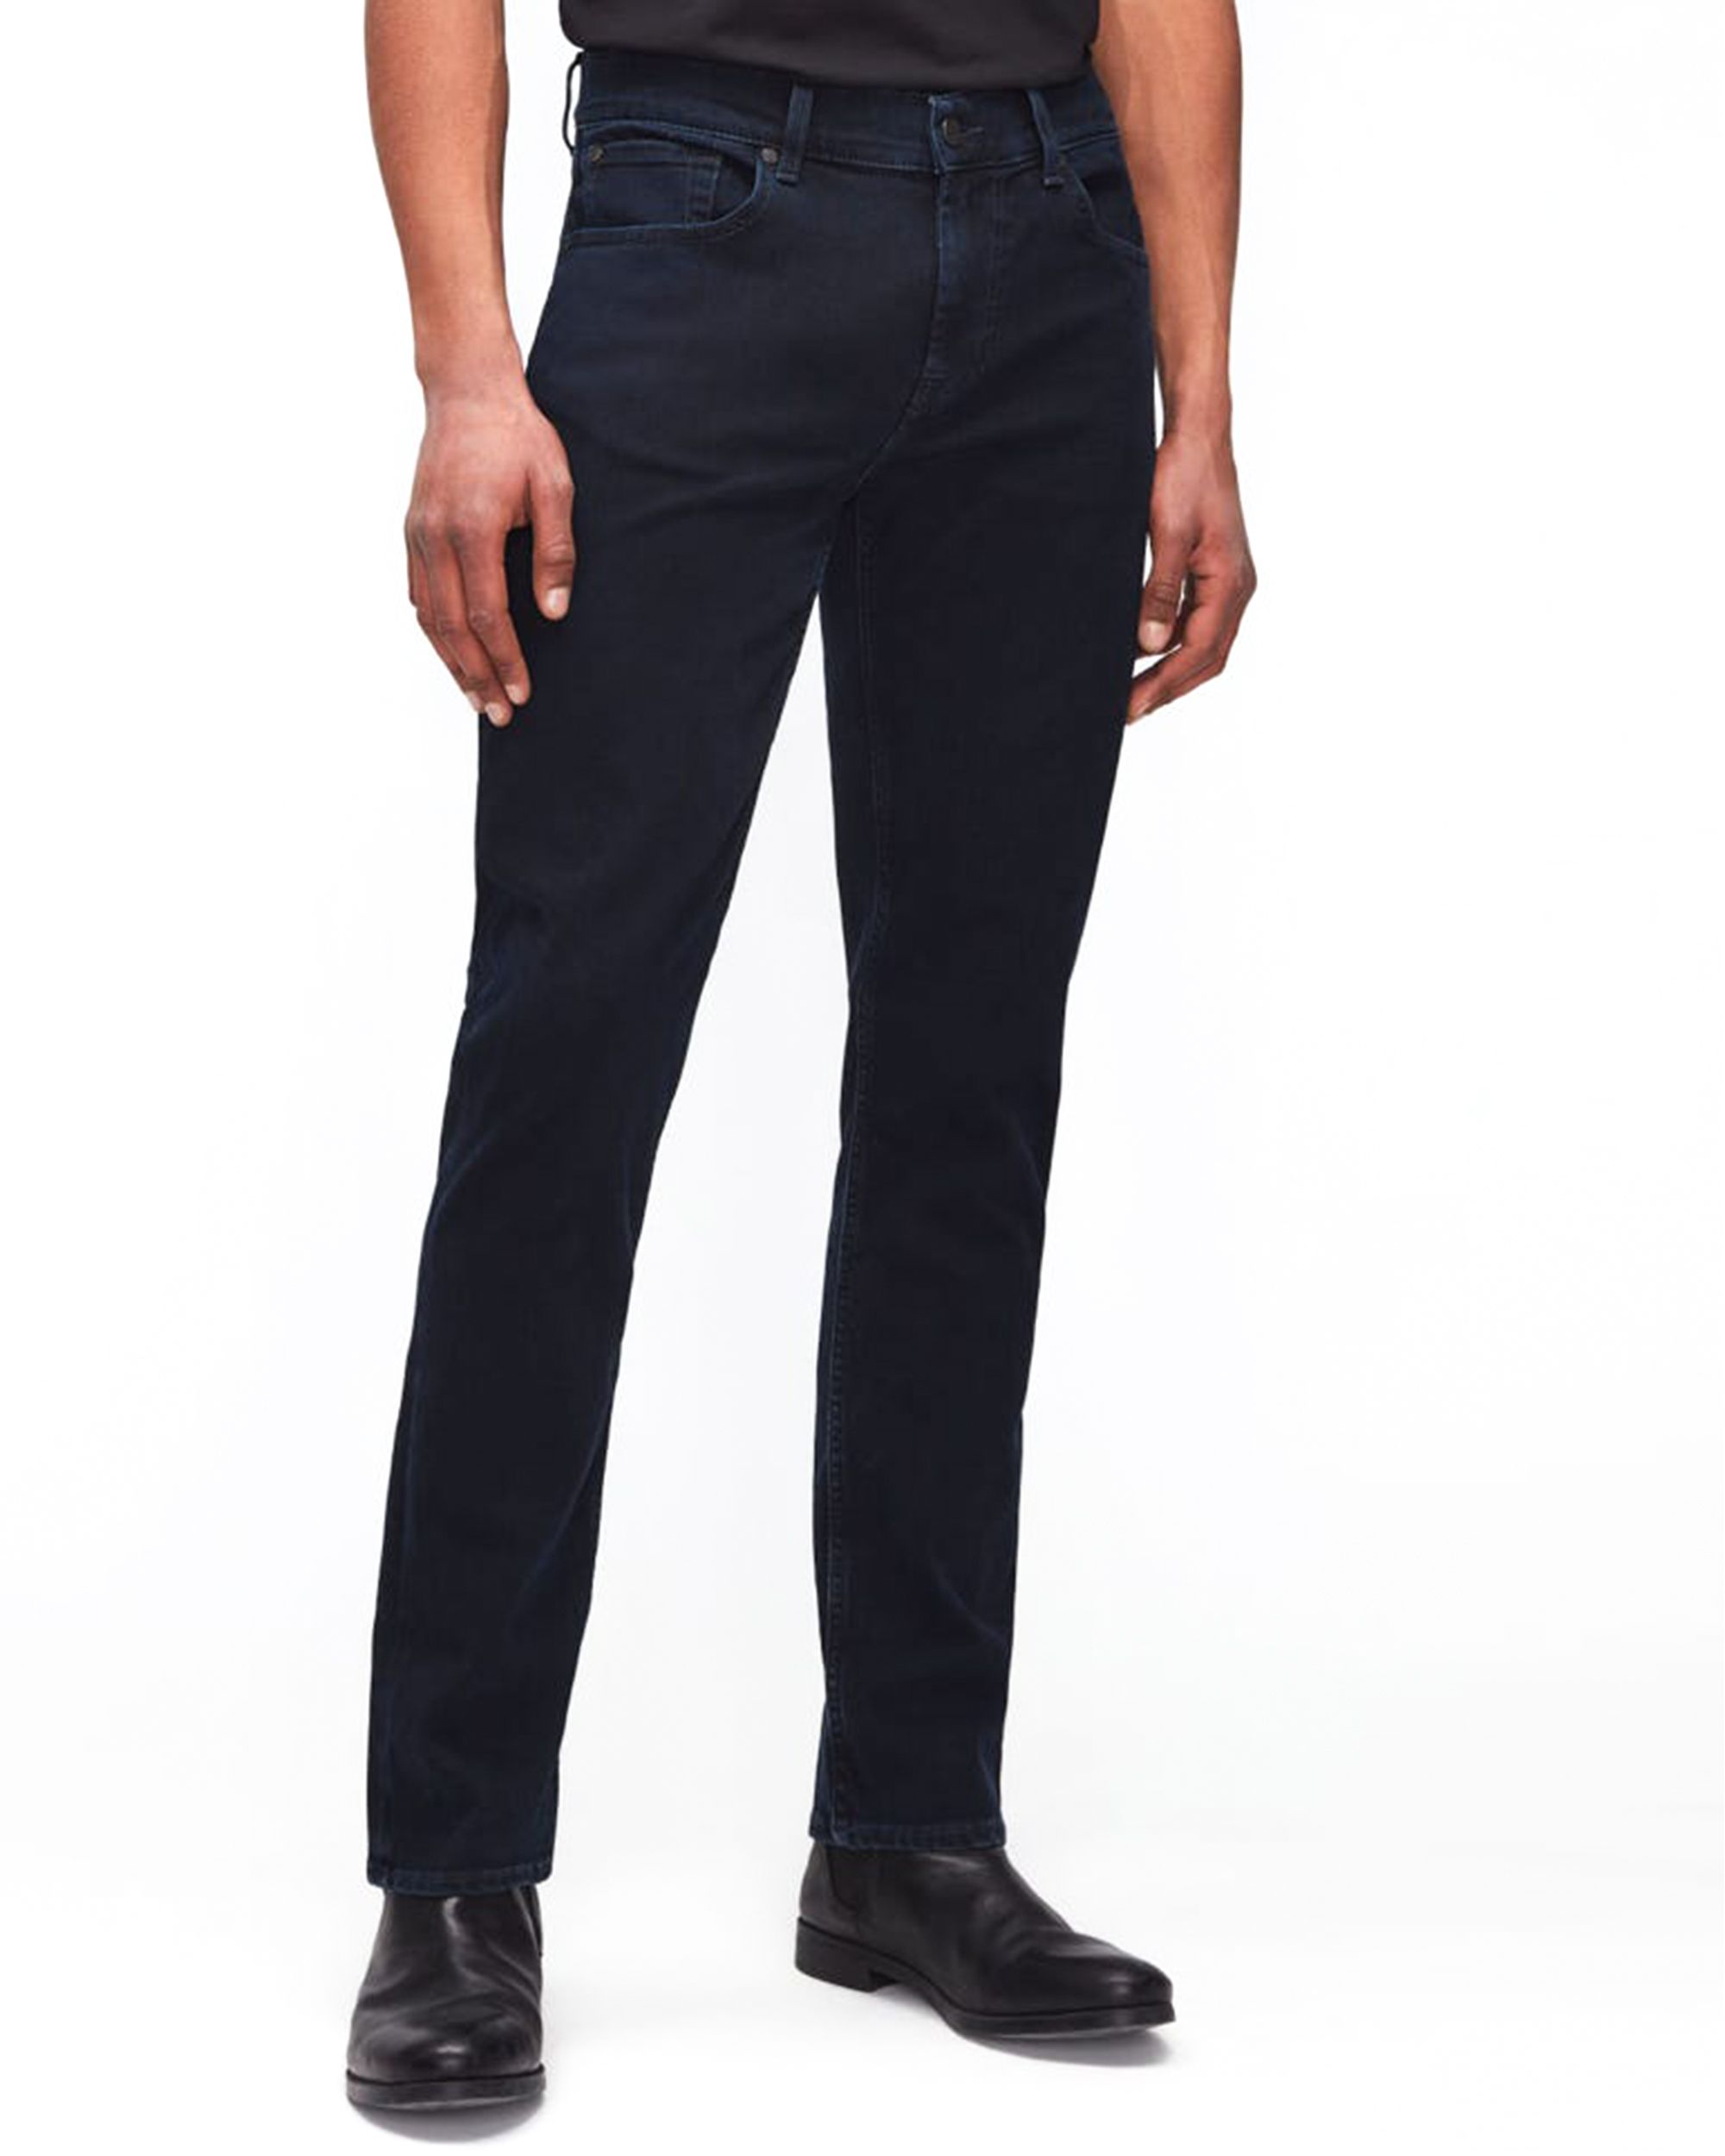 Seven for all mankind Jeans Donker blauw 081445-001-30